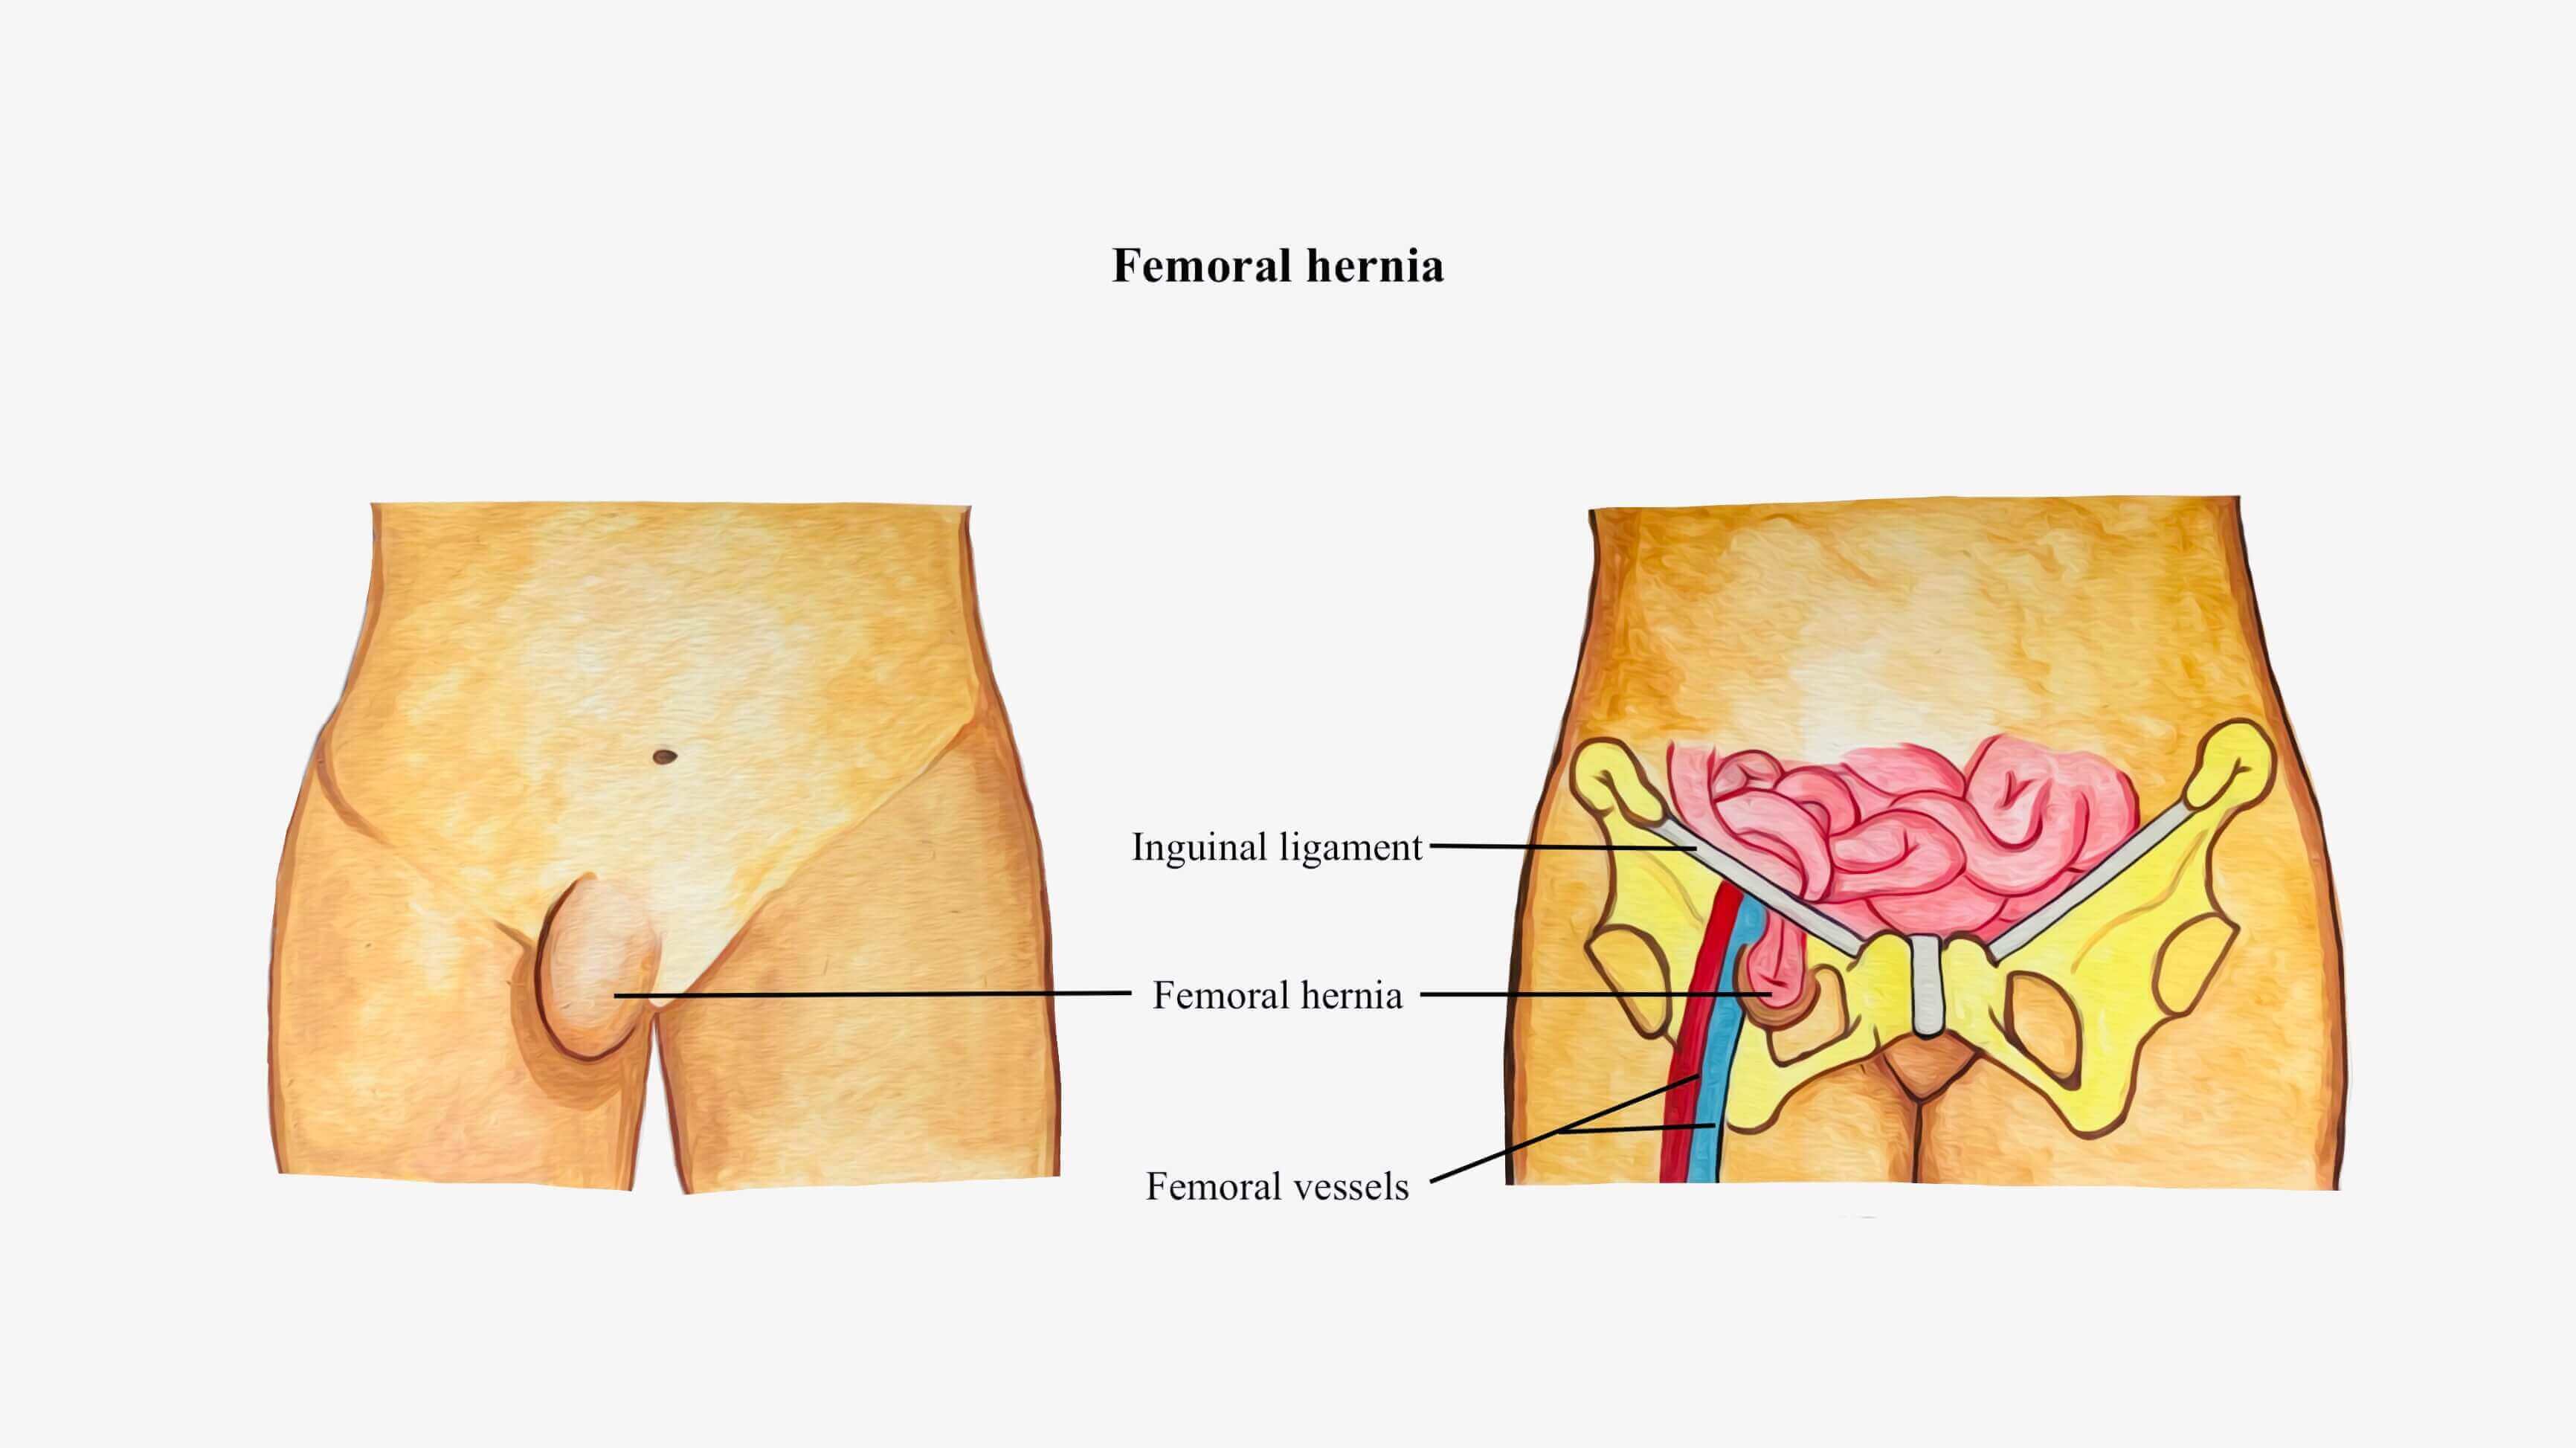 Understanding the Differences Between Femoral Hernia vs Inguinal